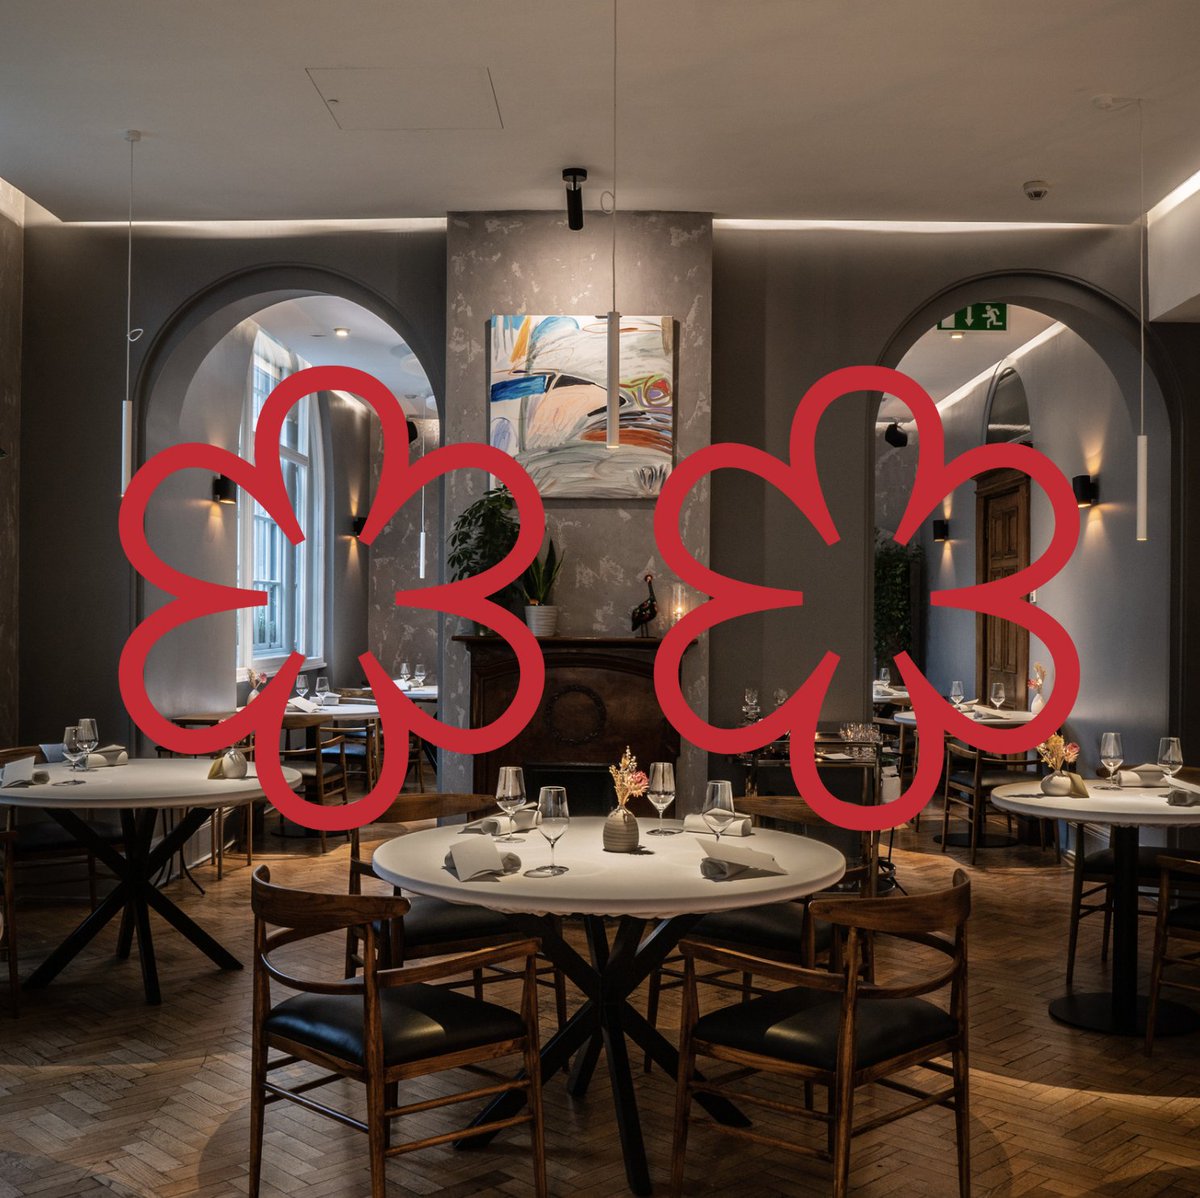 We are proud to share that we have retained our 2 Michelin stars! A huge thank you to our team for their hard work and dedication. Well done to all of those new stars as well as everyone who retained their stars! @MichelinGuideUK #michelinstar23 #michelinguidegbi @RafaelCagali